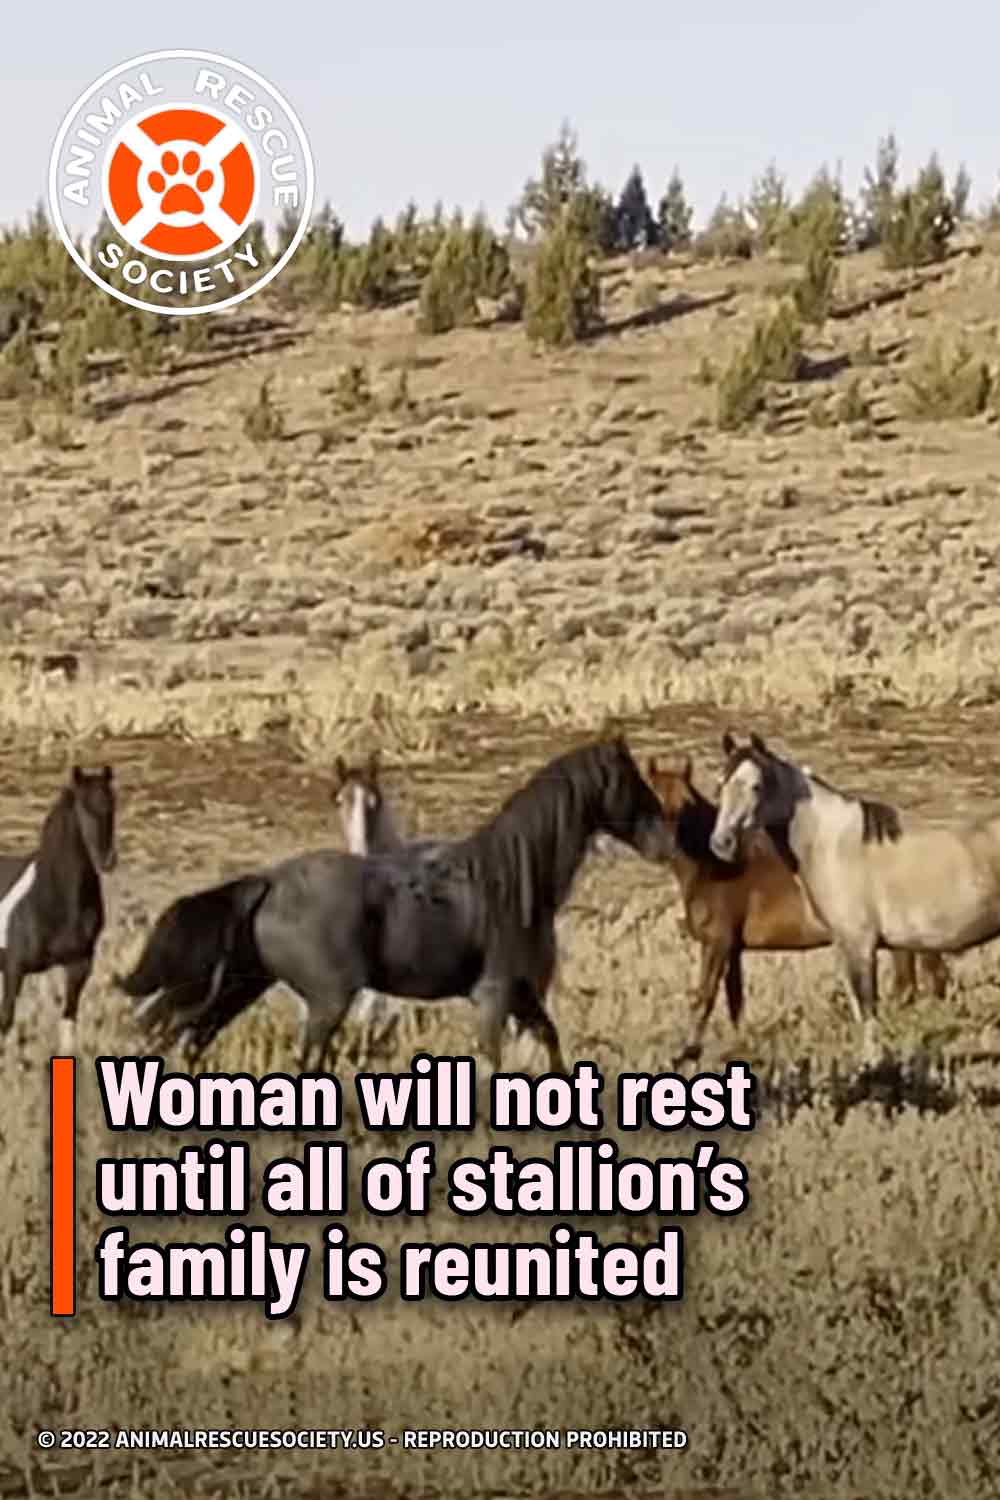 Woman will not rest until all of stallion’s family is reunited